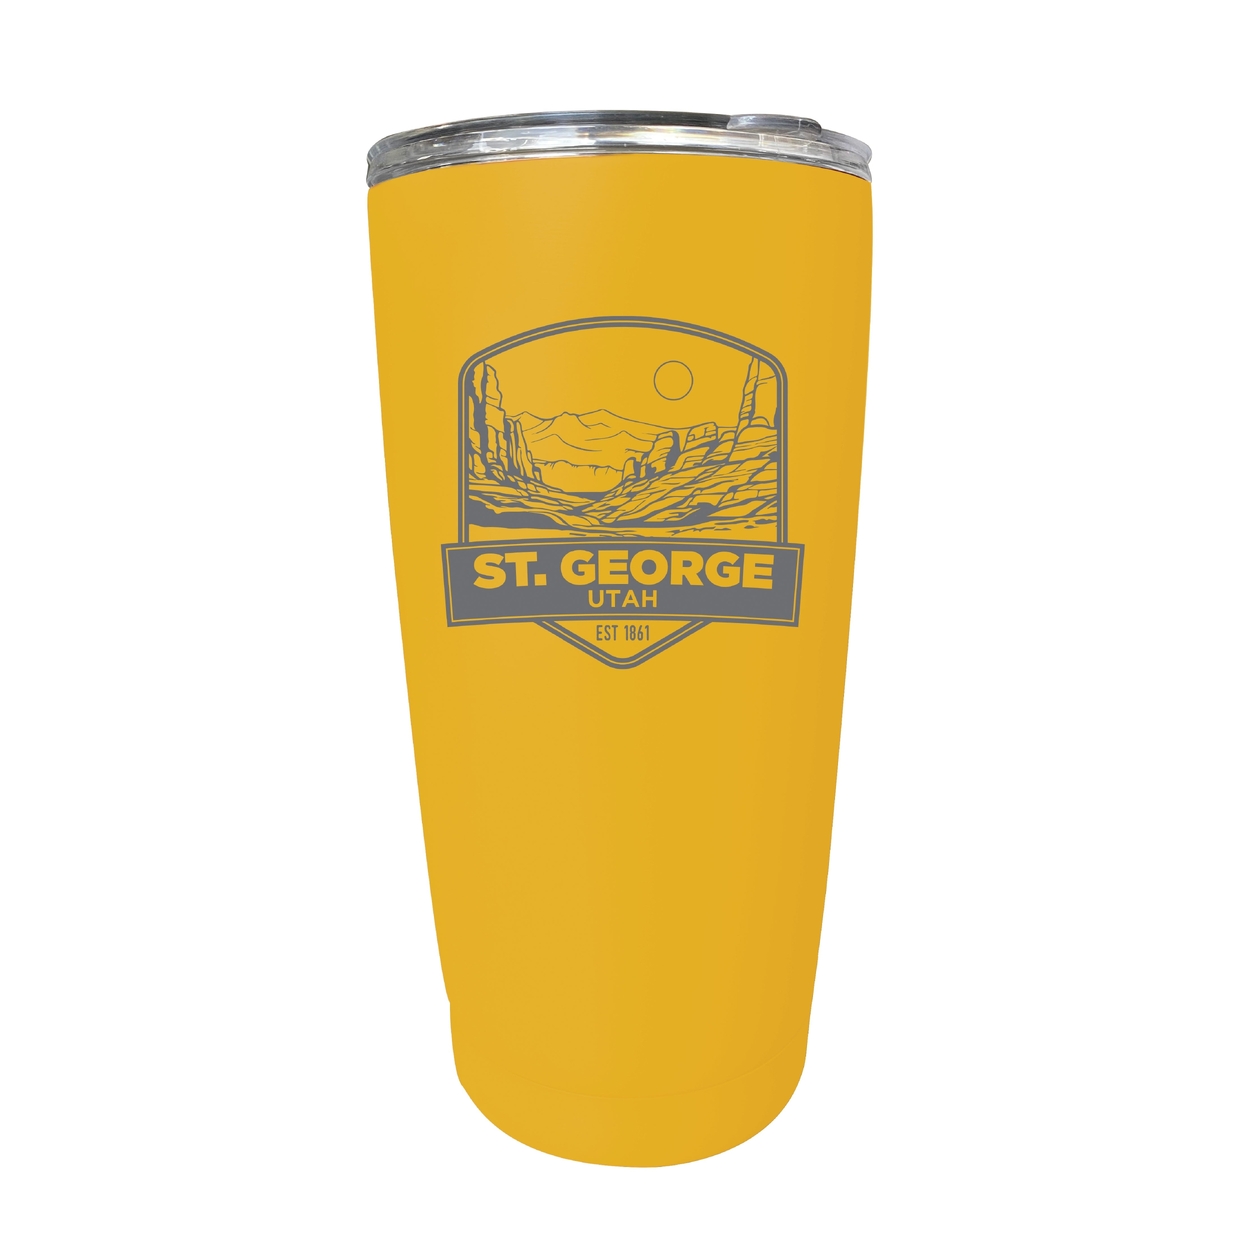 St. George Utah Souvenir 16 Oz Engraved Stainless Steel Insulated Tumbler - Yellow,,Single Unit